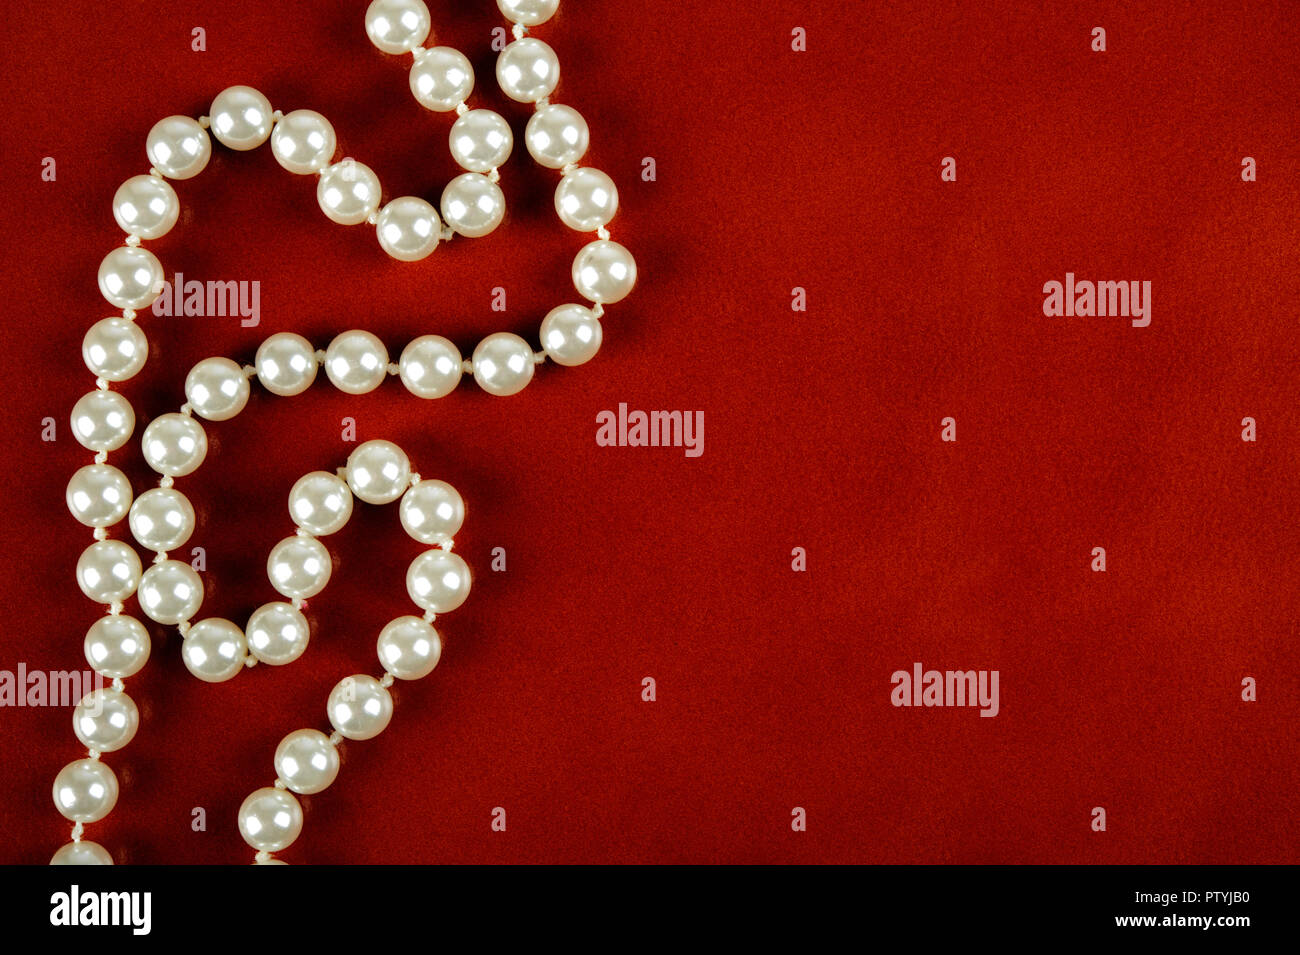 White pearl necklace on reddish brown leather background. Stock Photo